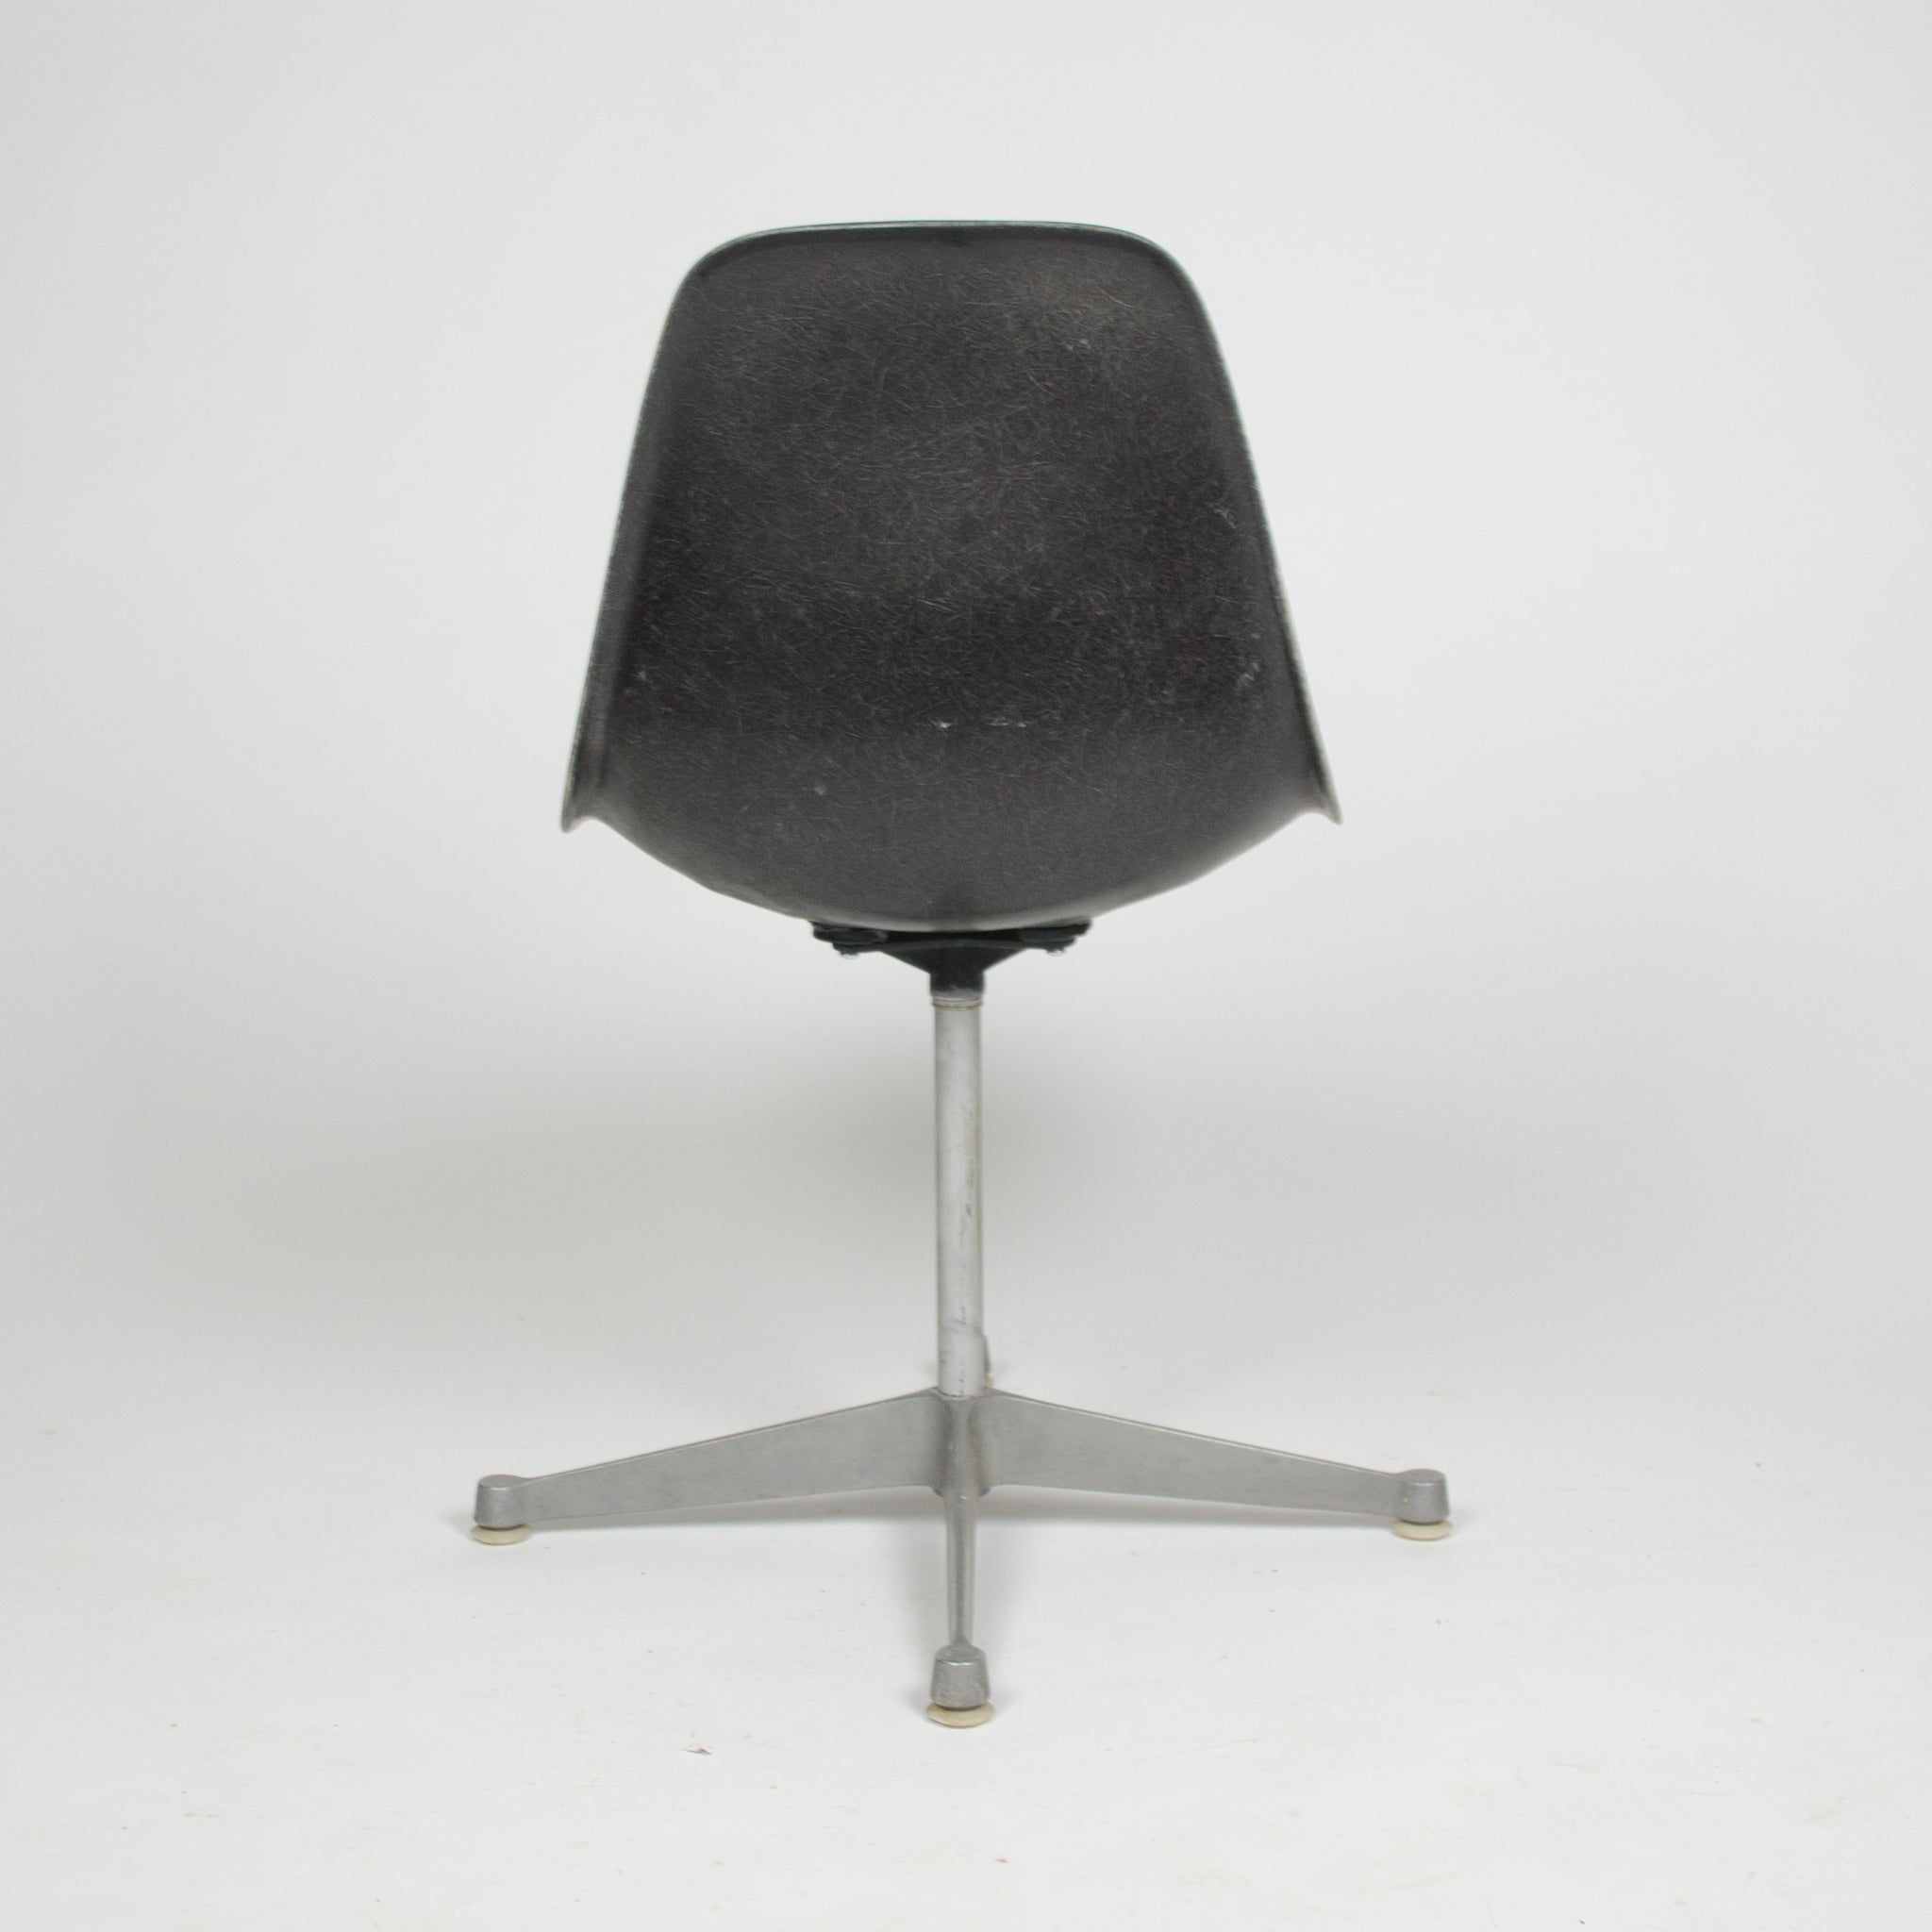 SOLD Eames Herman Black Fiberglass Side Shell Chairs (Sold Separately)